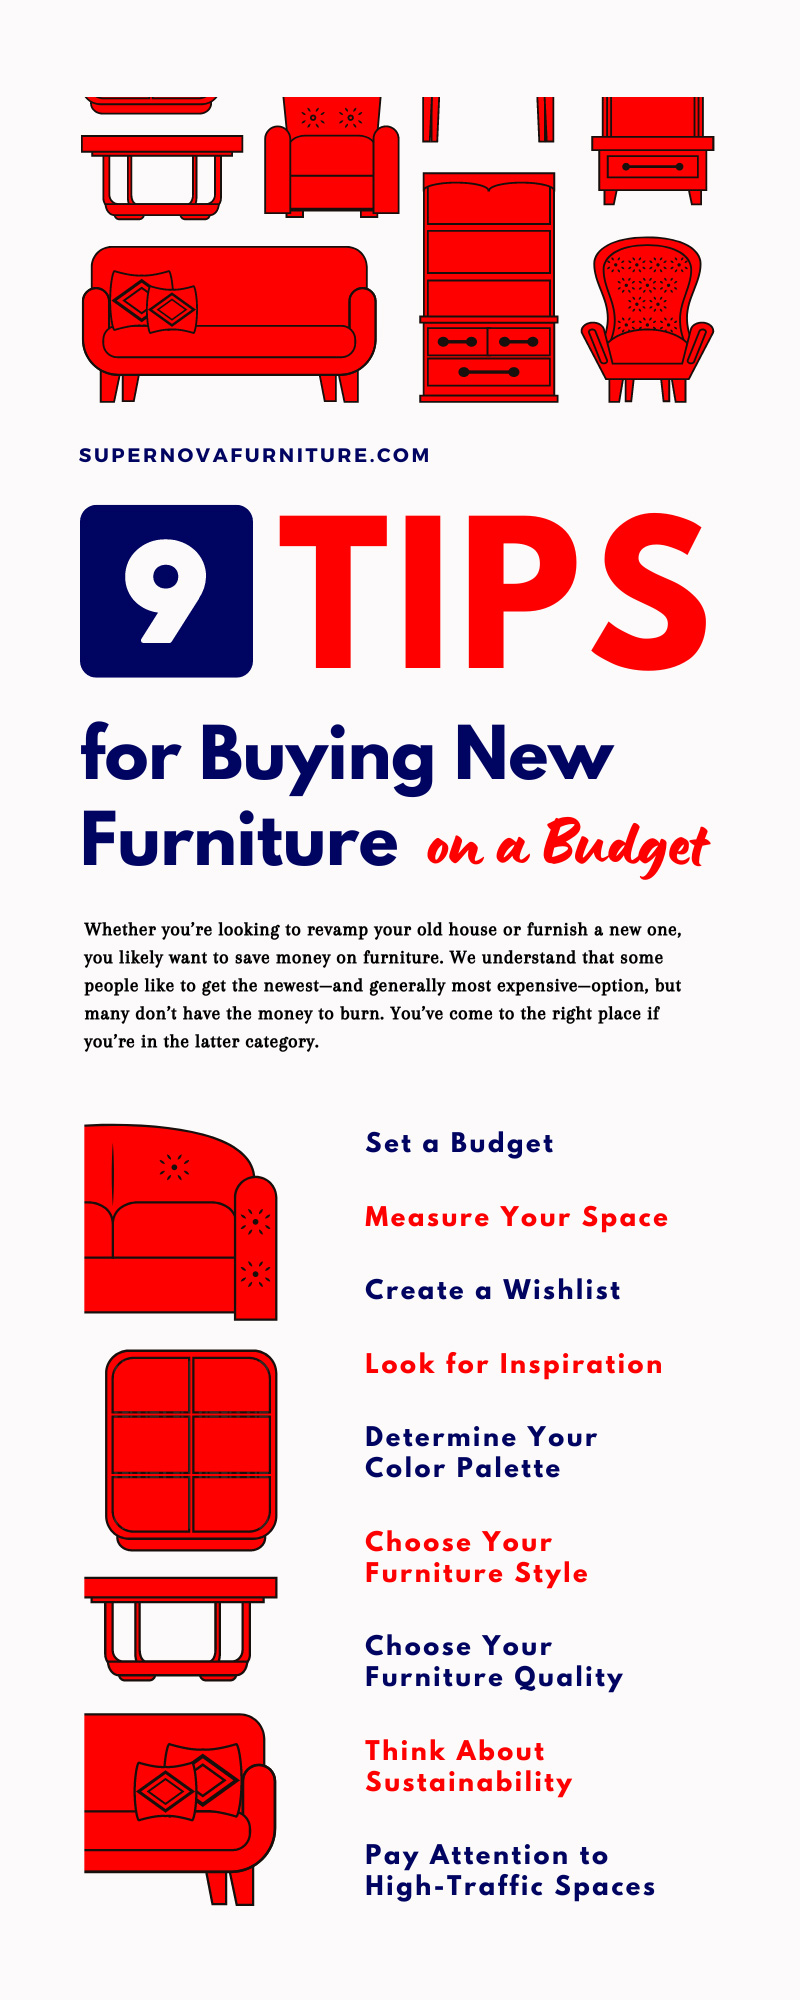 9 Tips for Buying New Furniture on a Budget